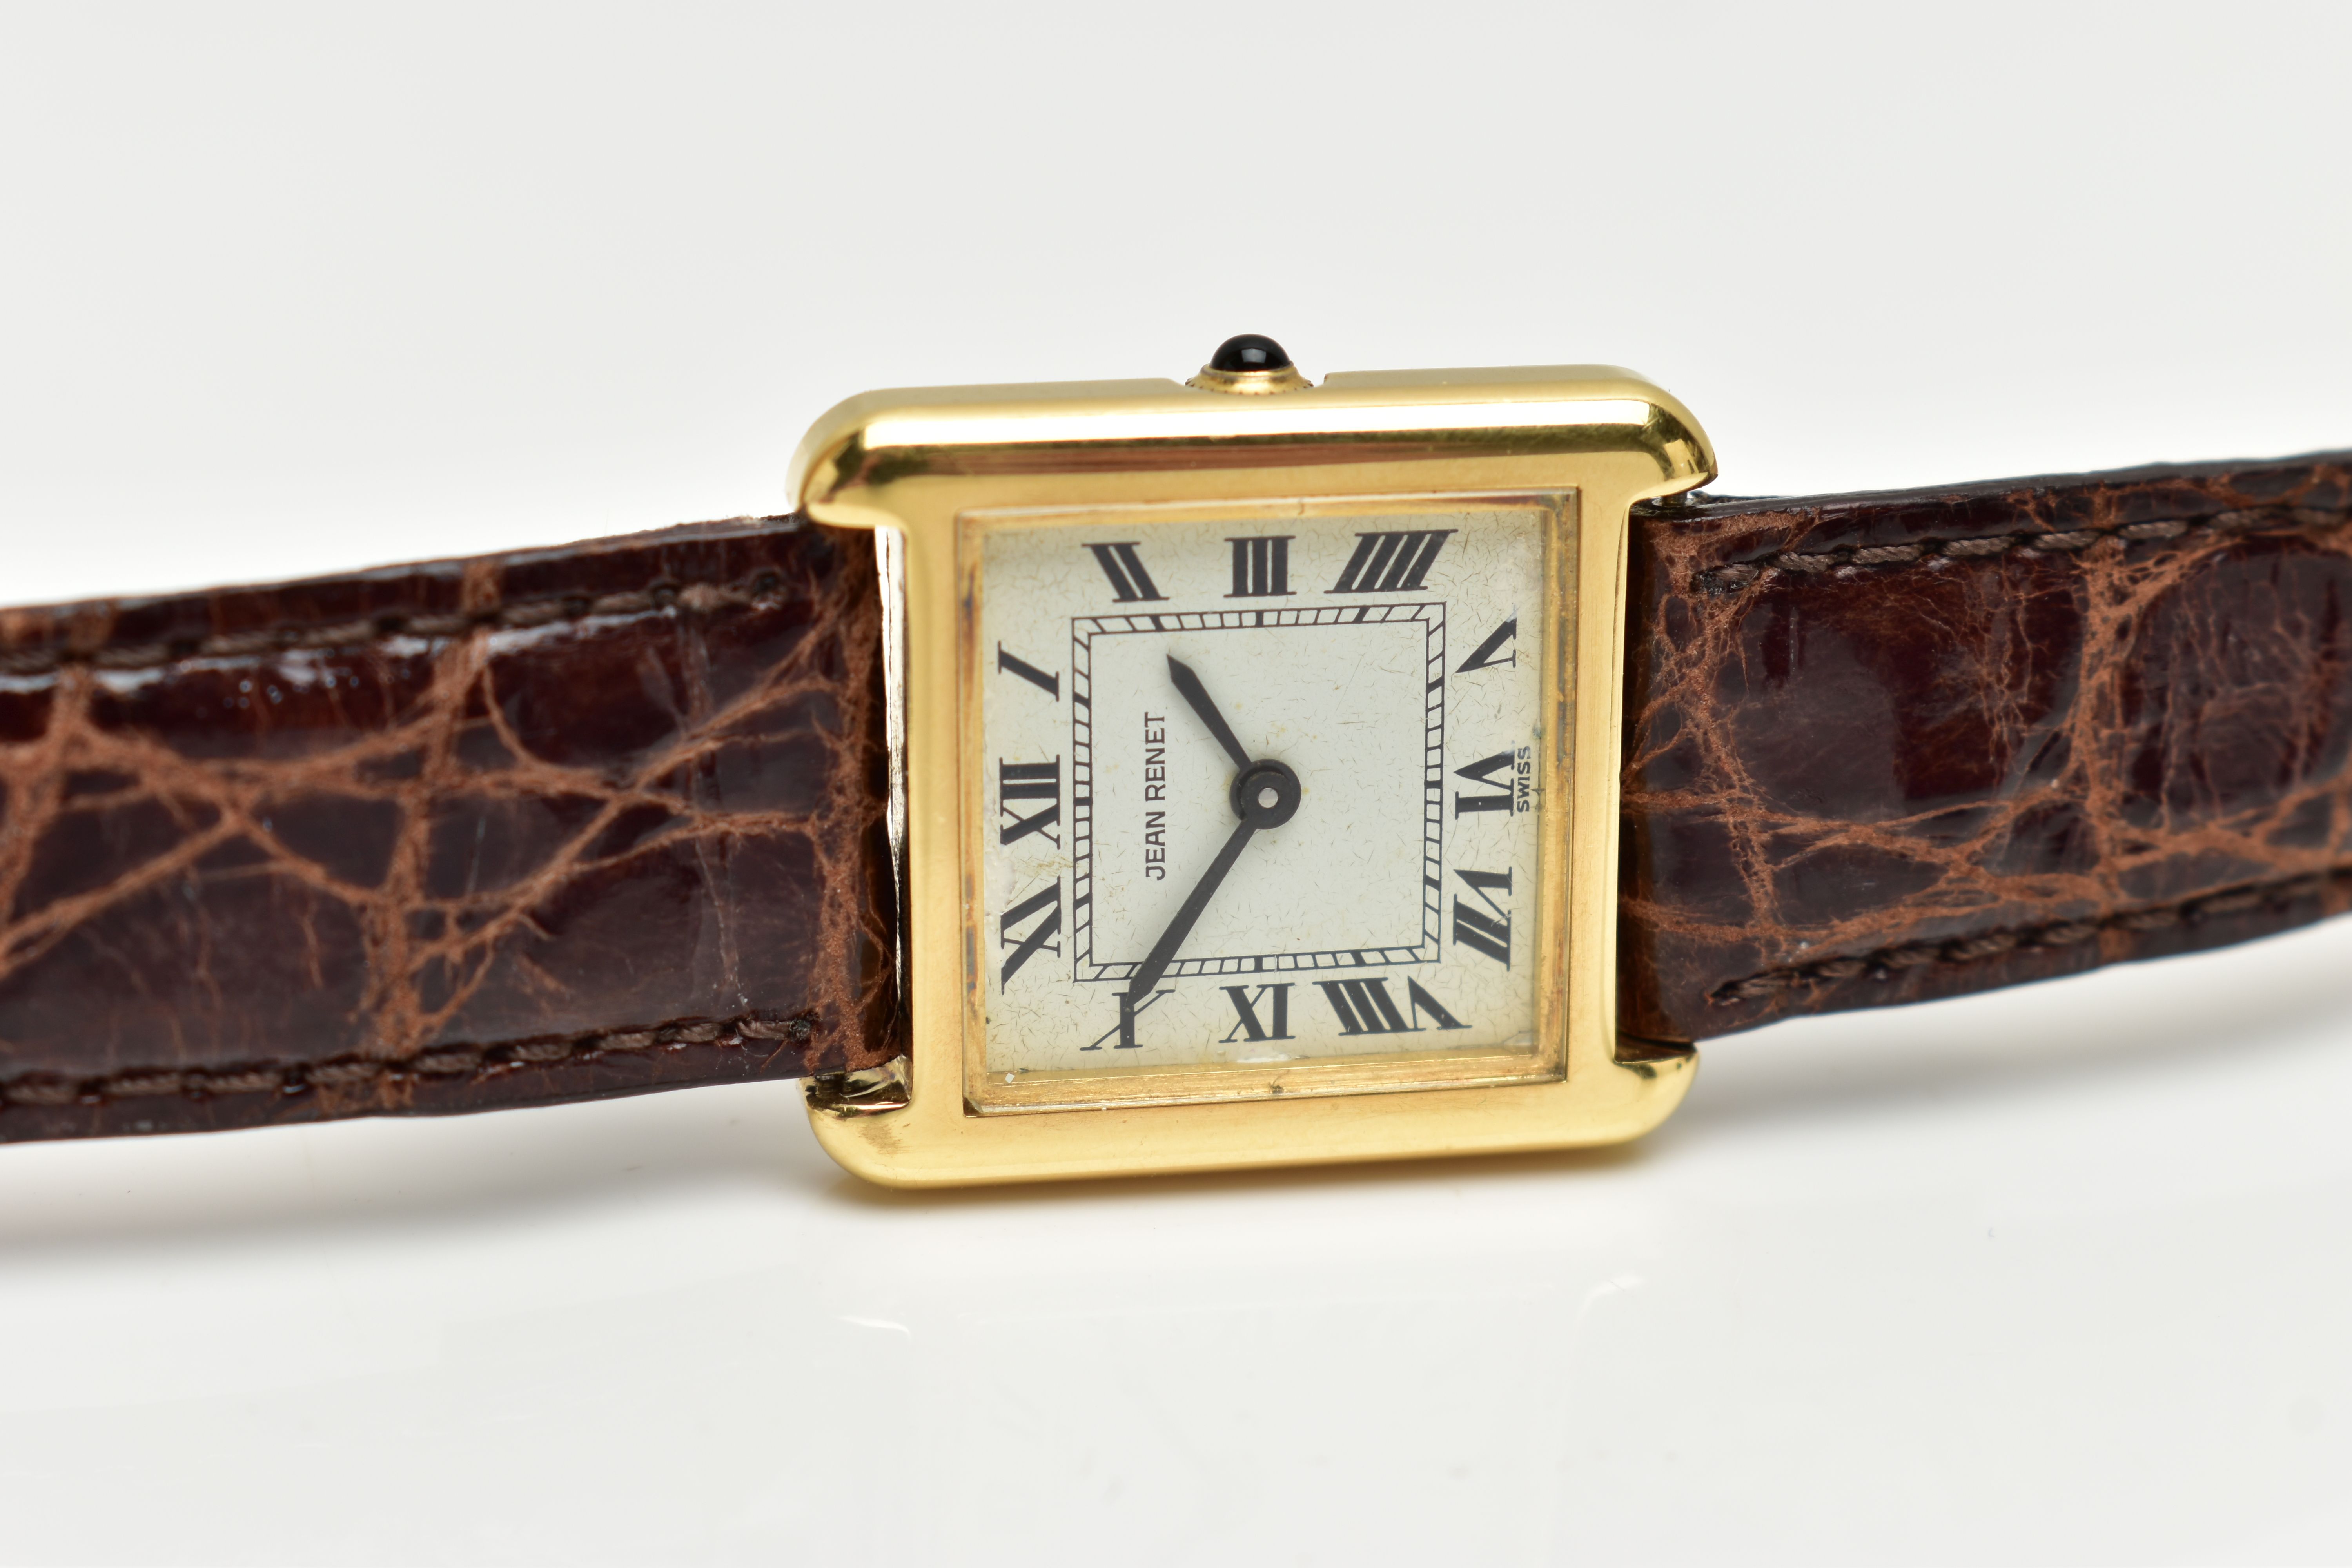 A LADIES 18CT GOLD 'JEAN RENET' WRISTWATCH, hand wound movement, square dial, signed 'Jean Renet', - Image 4 of 6